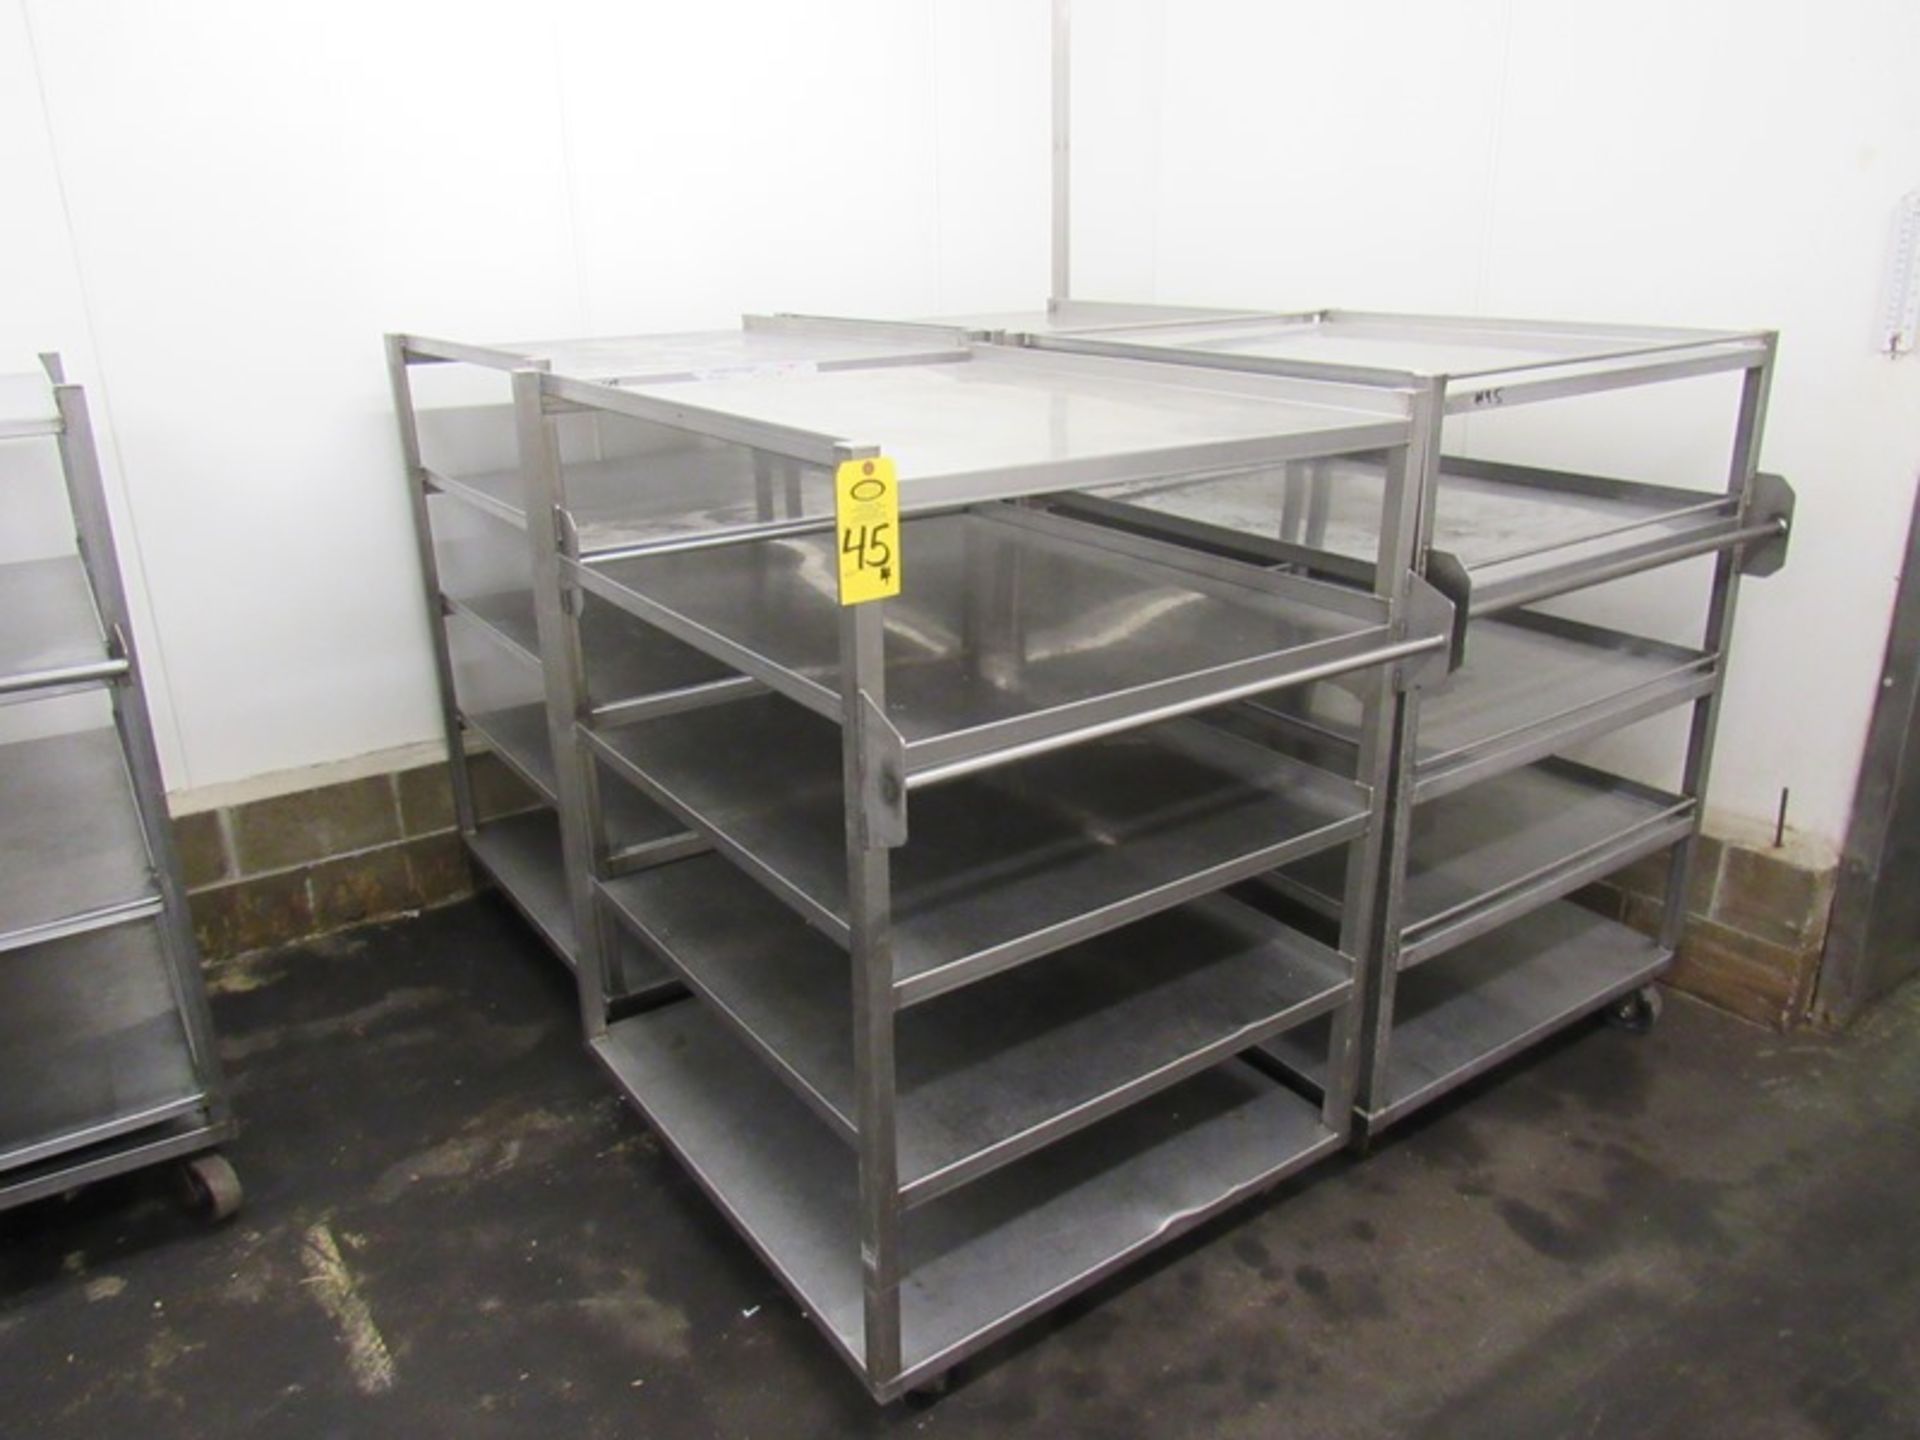 Stainless Steel Carts, 37" W X 48" L X 5' T, 5 shelves spaced 11" apart (All Funds Must Be Received